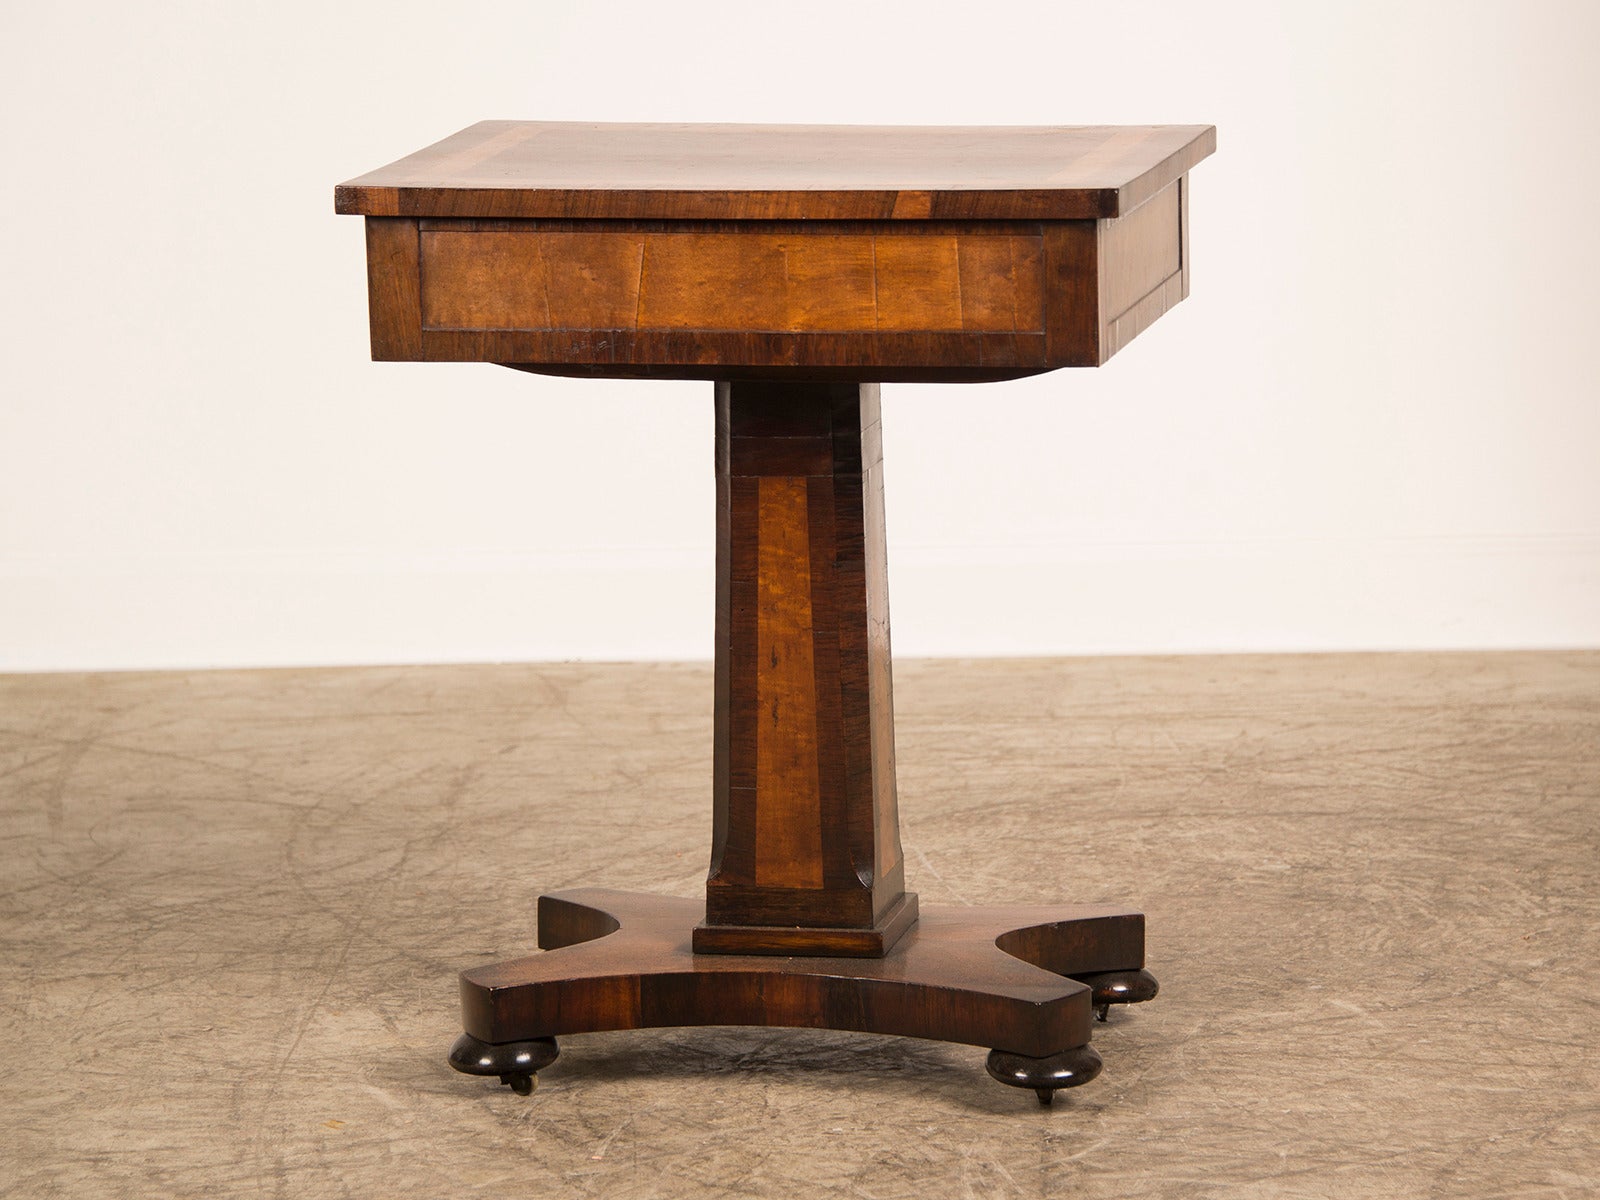 William IV period rosewood and walnut pedestal table with drawer, England c.1835